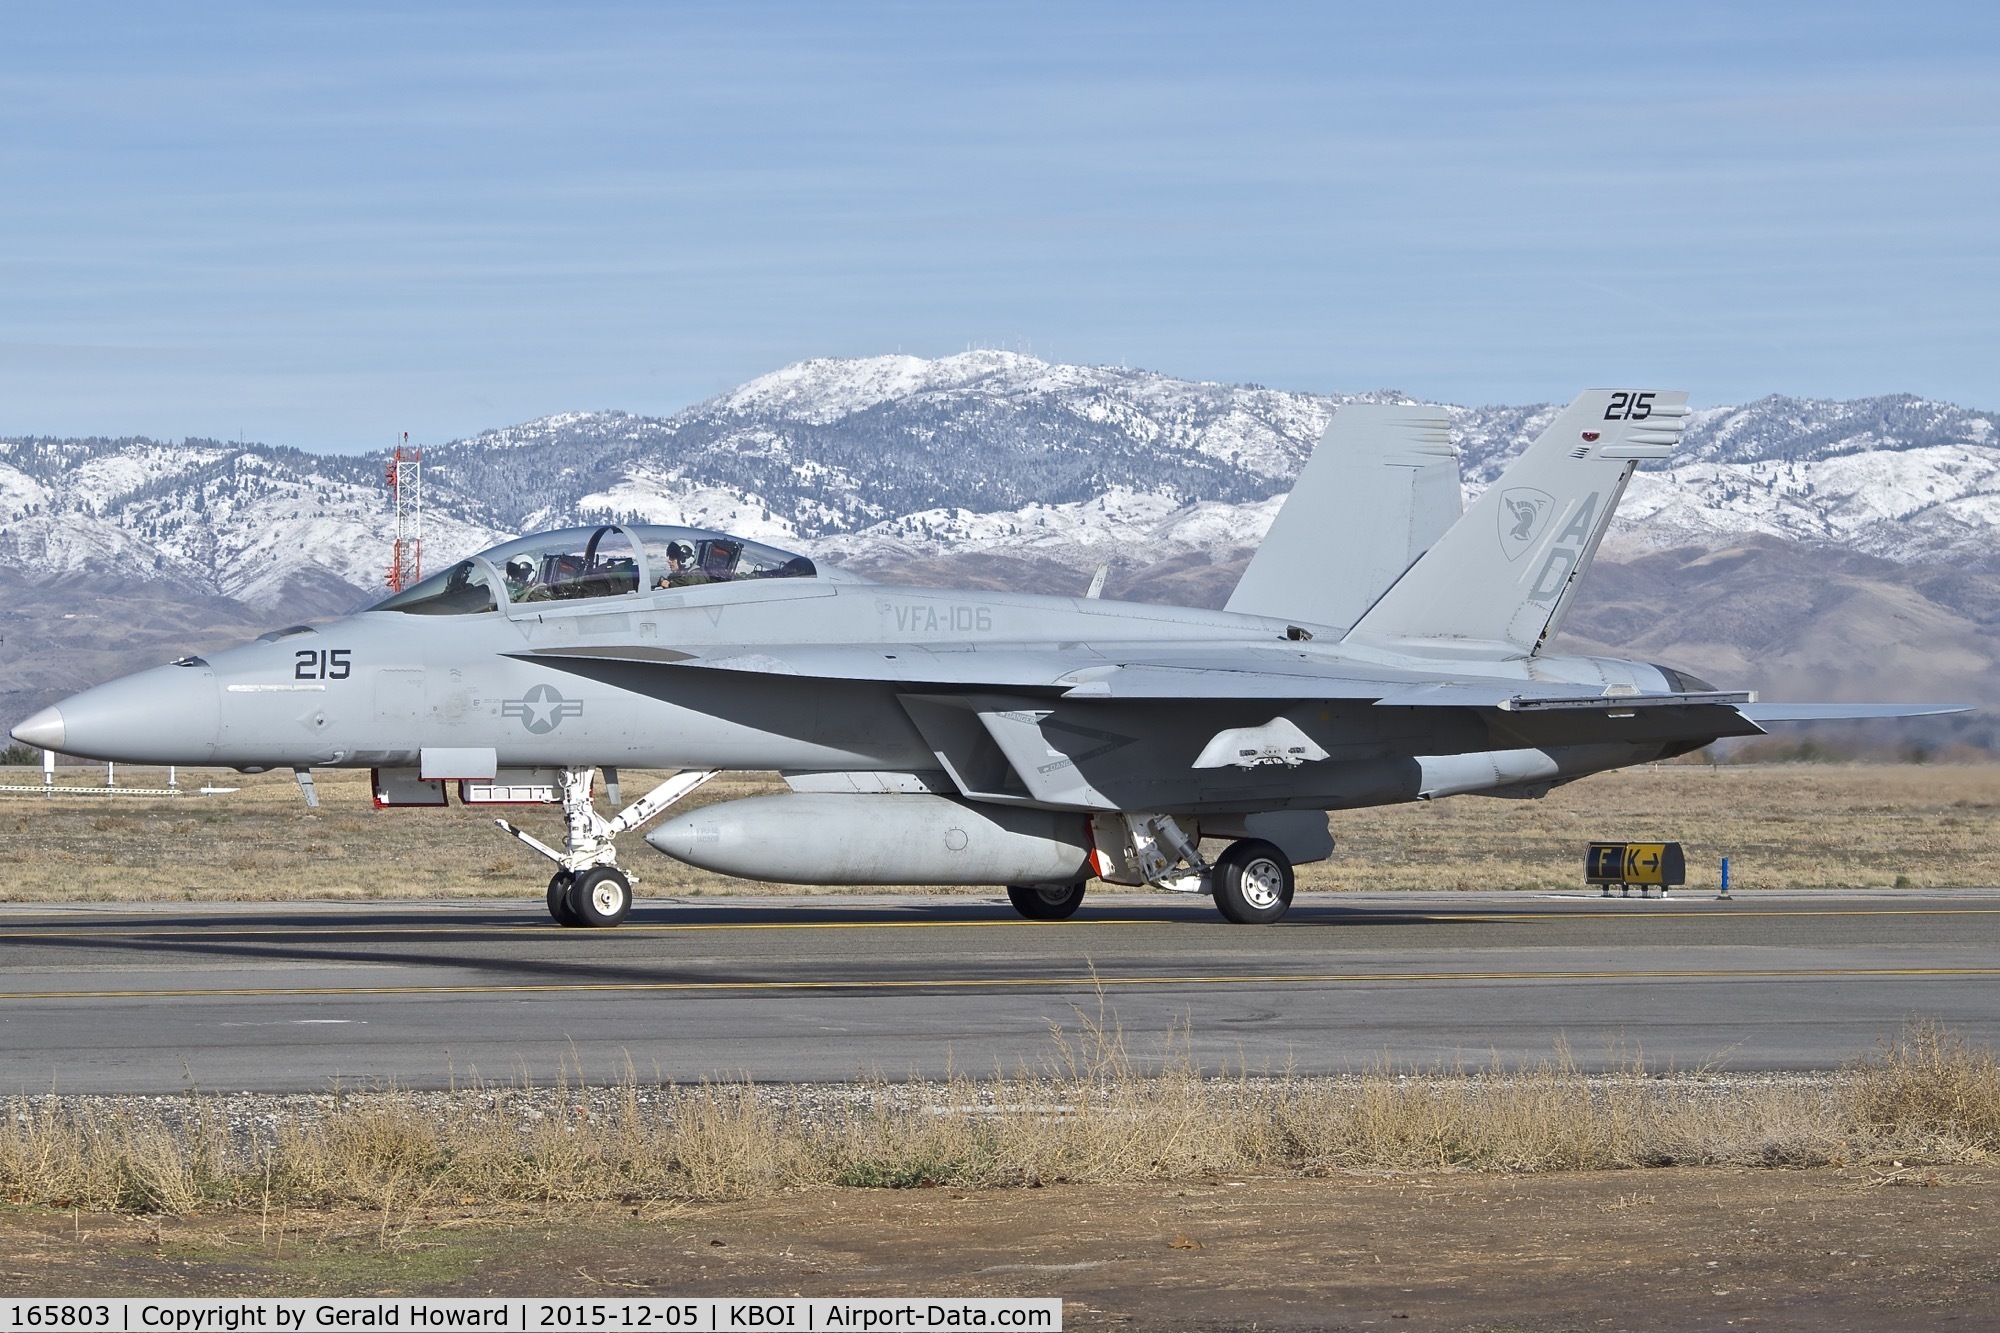 165803, Boeing F/A-18F Super Hornet C/N 1537/F029, Taxiing on Foxtrot to RWY 10R.  VFA-106 